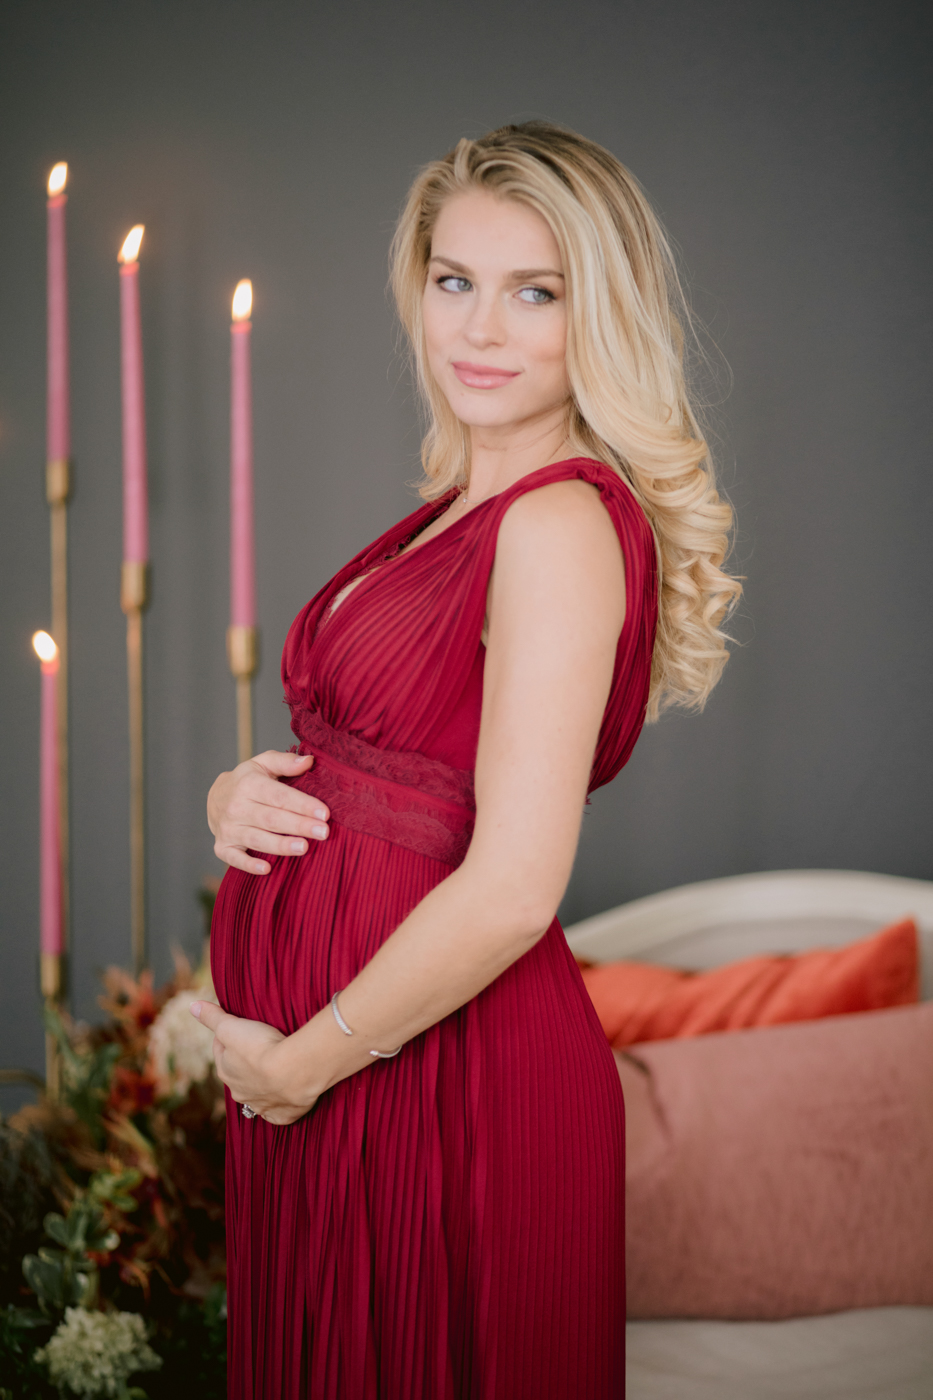 philly-bucks-county-maternity-photographer-mainline-west-chester-montgomery-county-new-jersey-nj-19.jpg